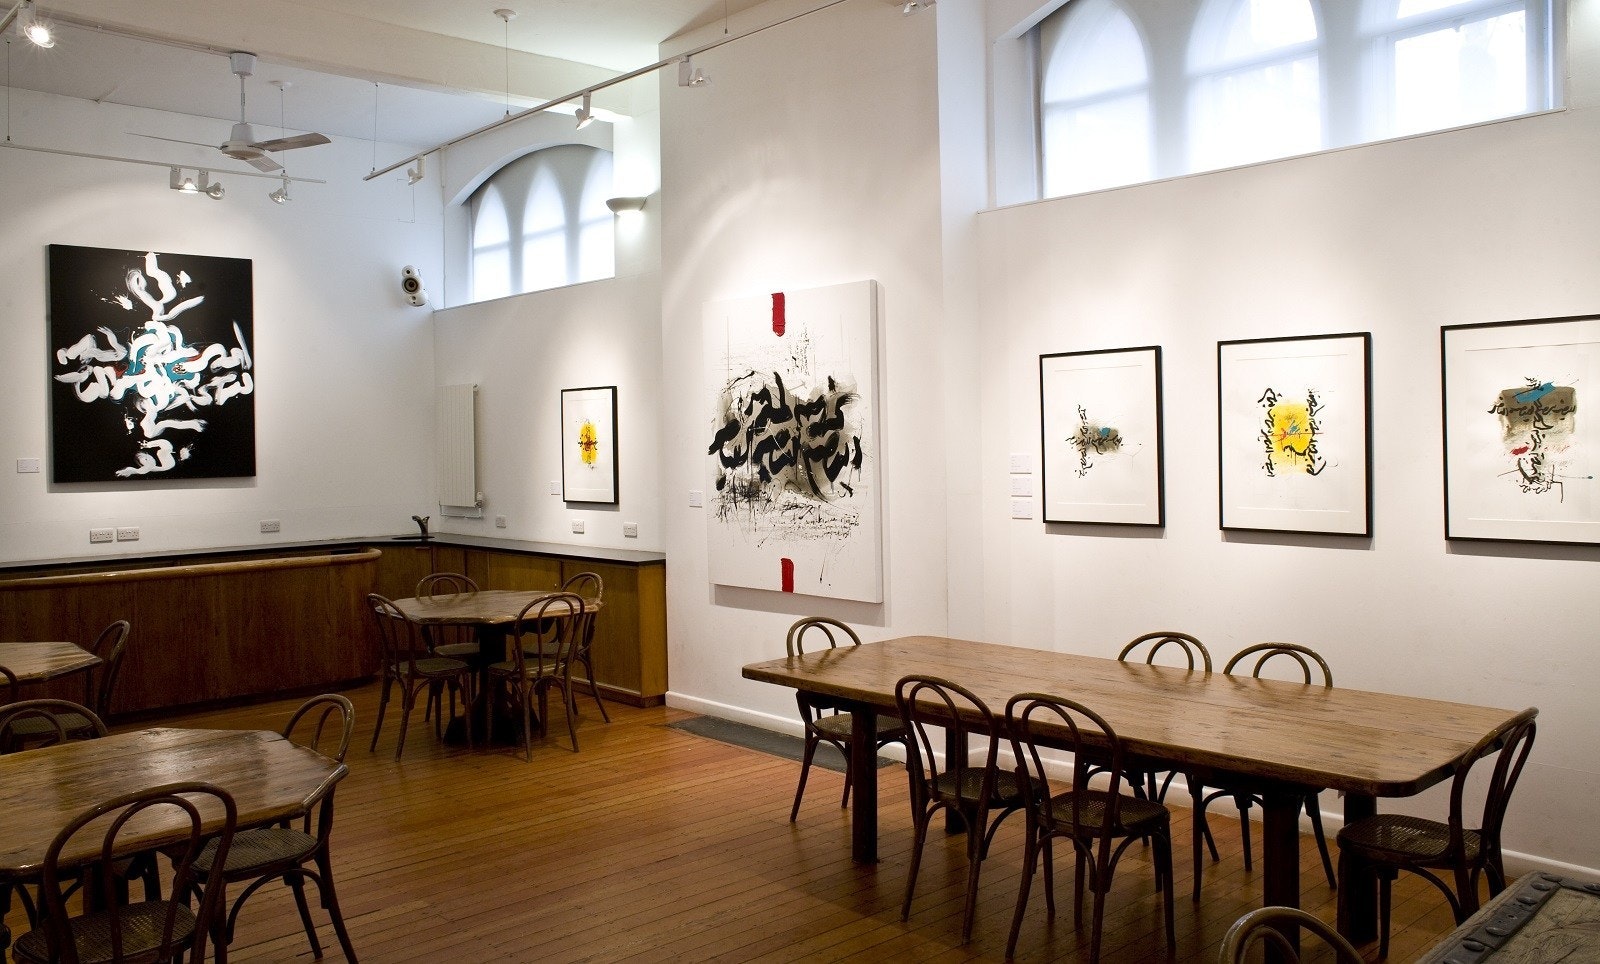 Dry Hire Venues in London - October Gallery